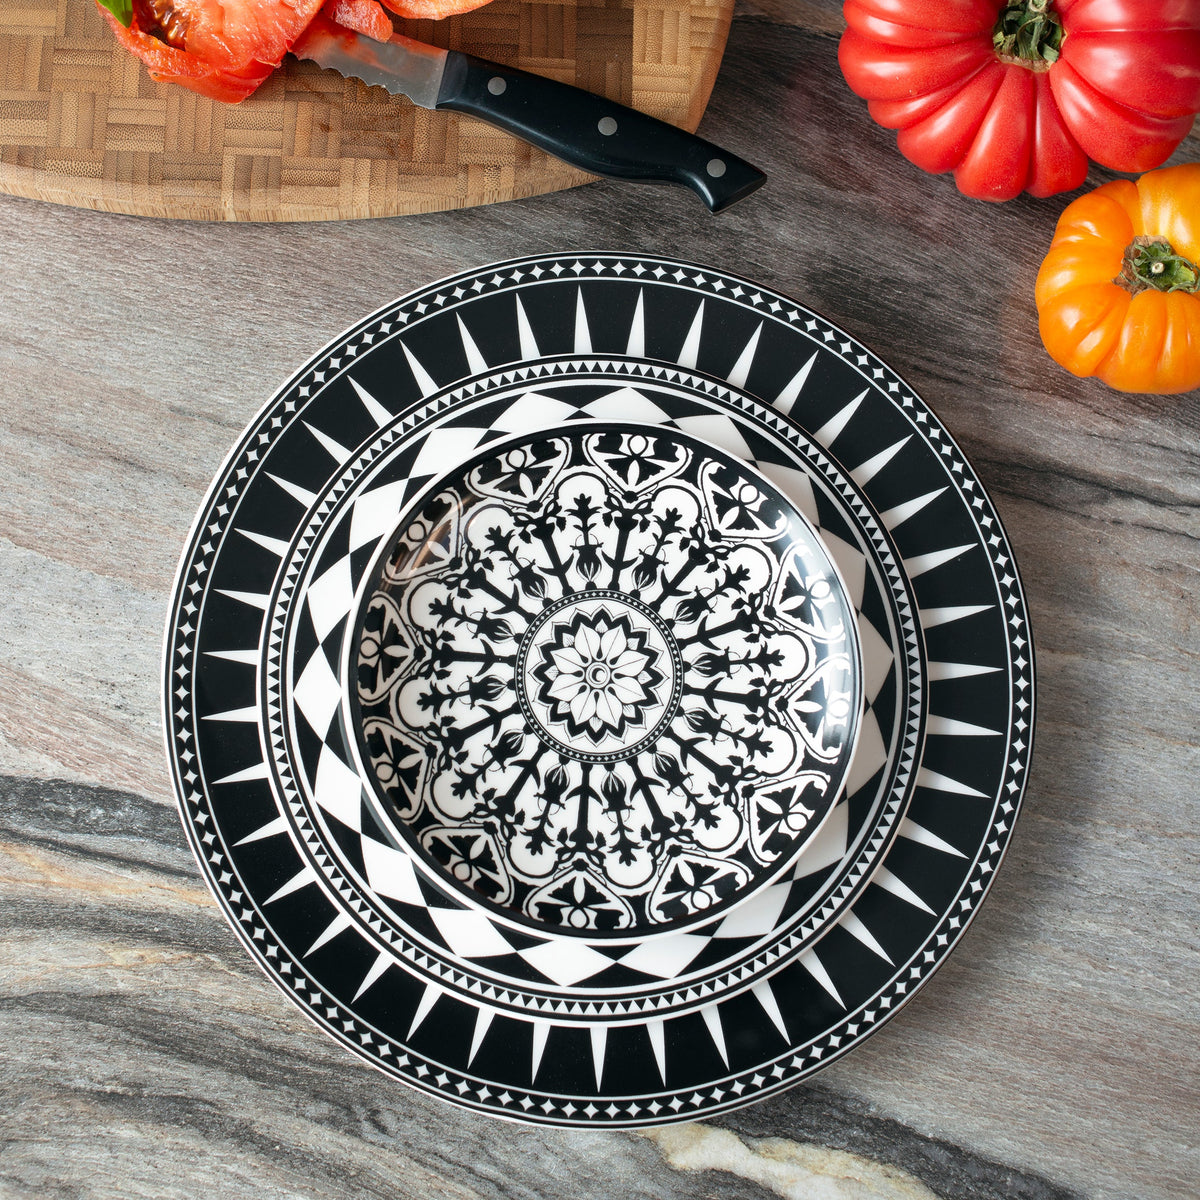 A Caskata Artisanal Home Marrakech Rimmed Dinner Plate with intricate patterns, reminiscent of Marrakech dinnerware, is displayed on a countertop surrounded by colorful vegetables and a cutting board with a knife.